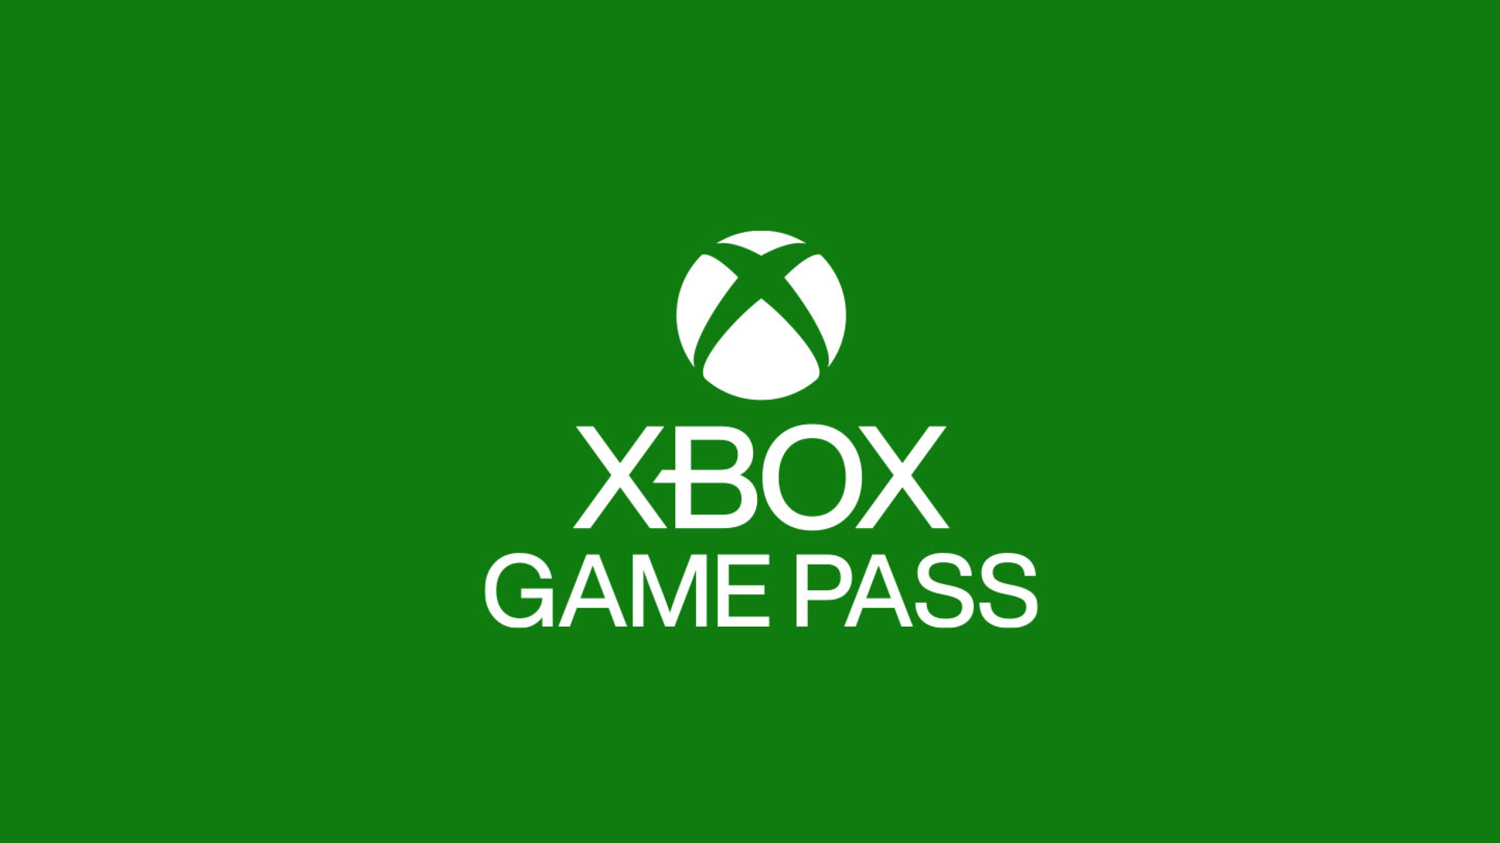 Yes, Blizzard titles will join Game Pass after the Microsoft merger